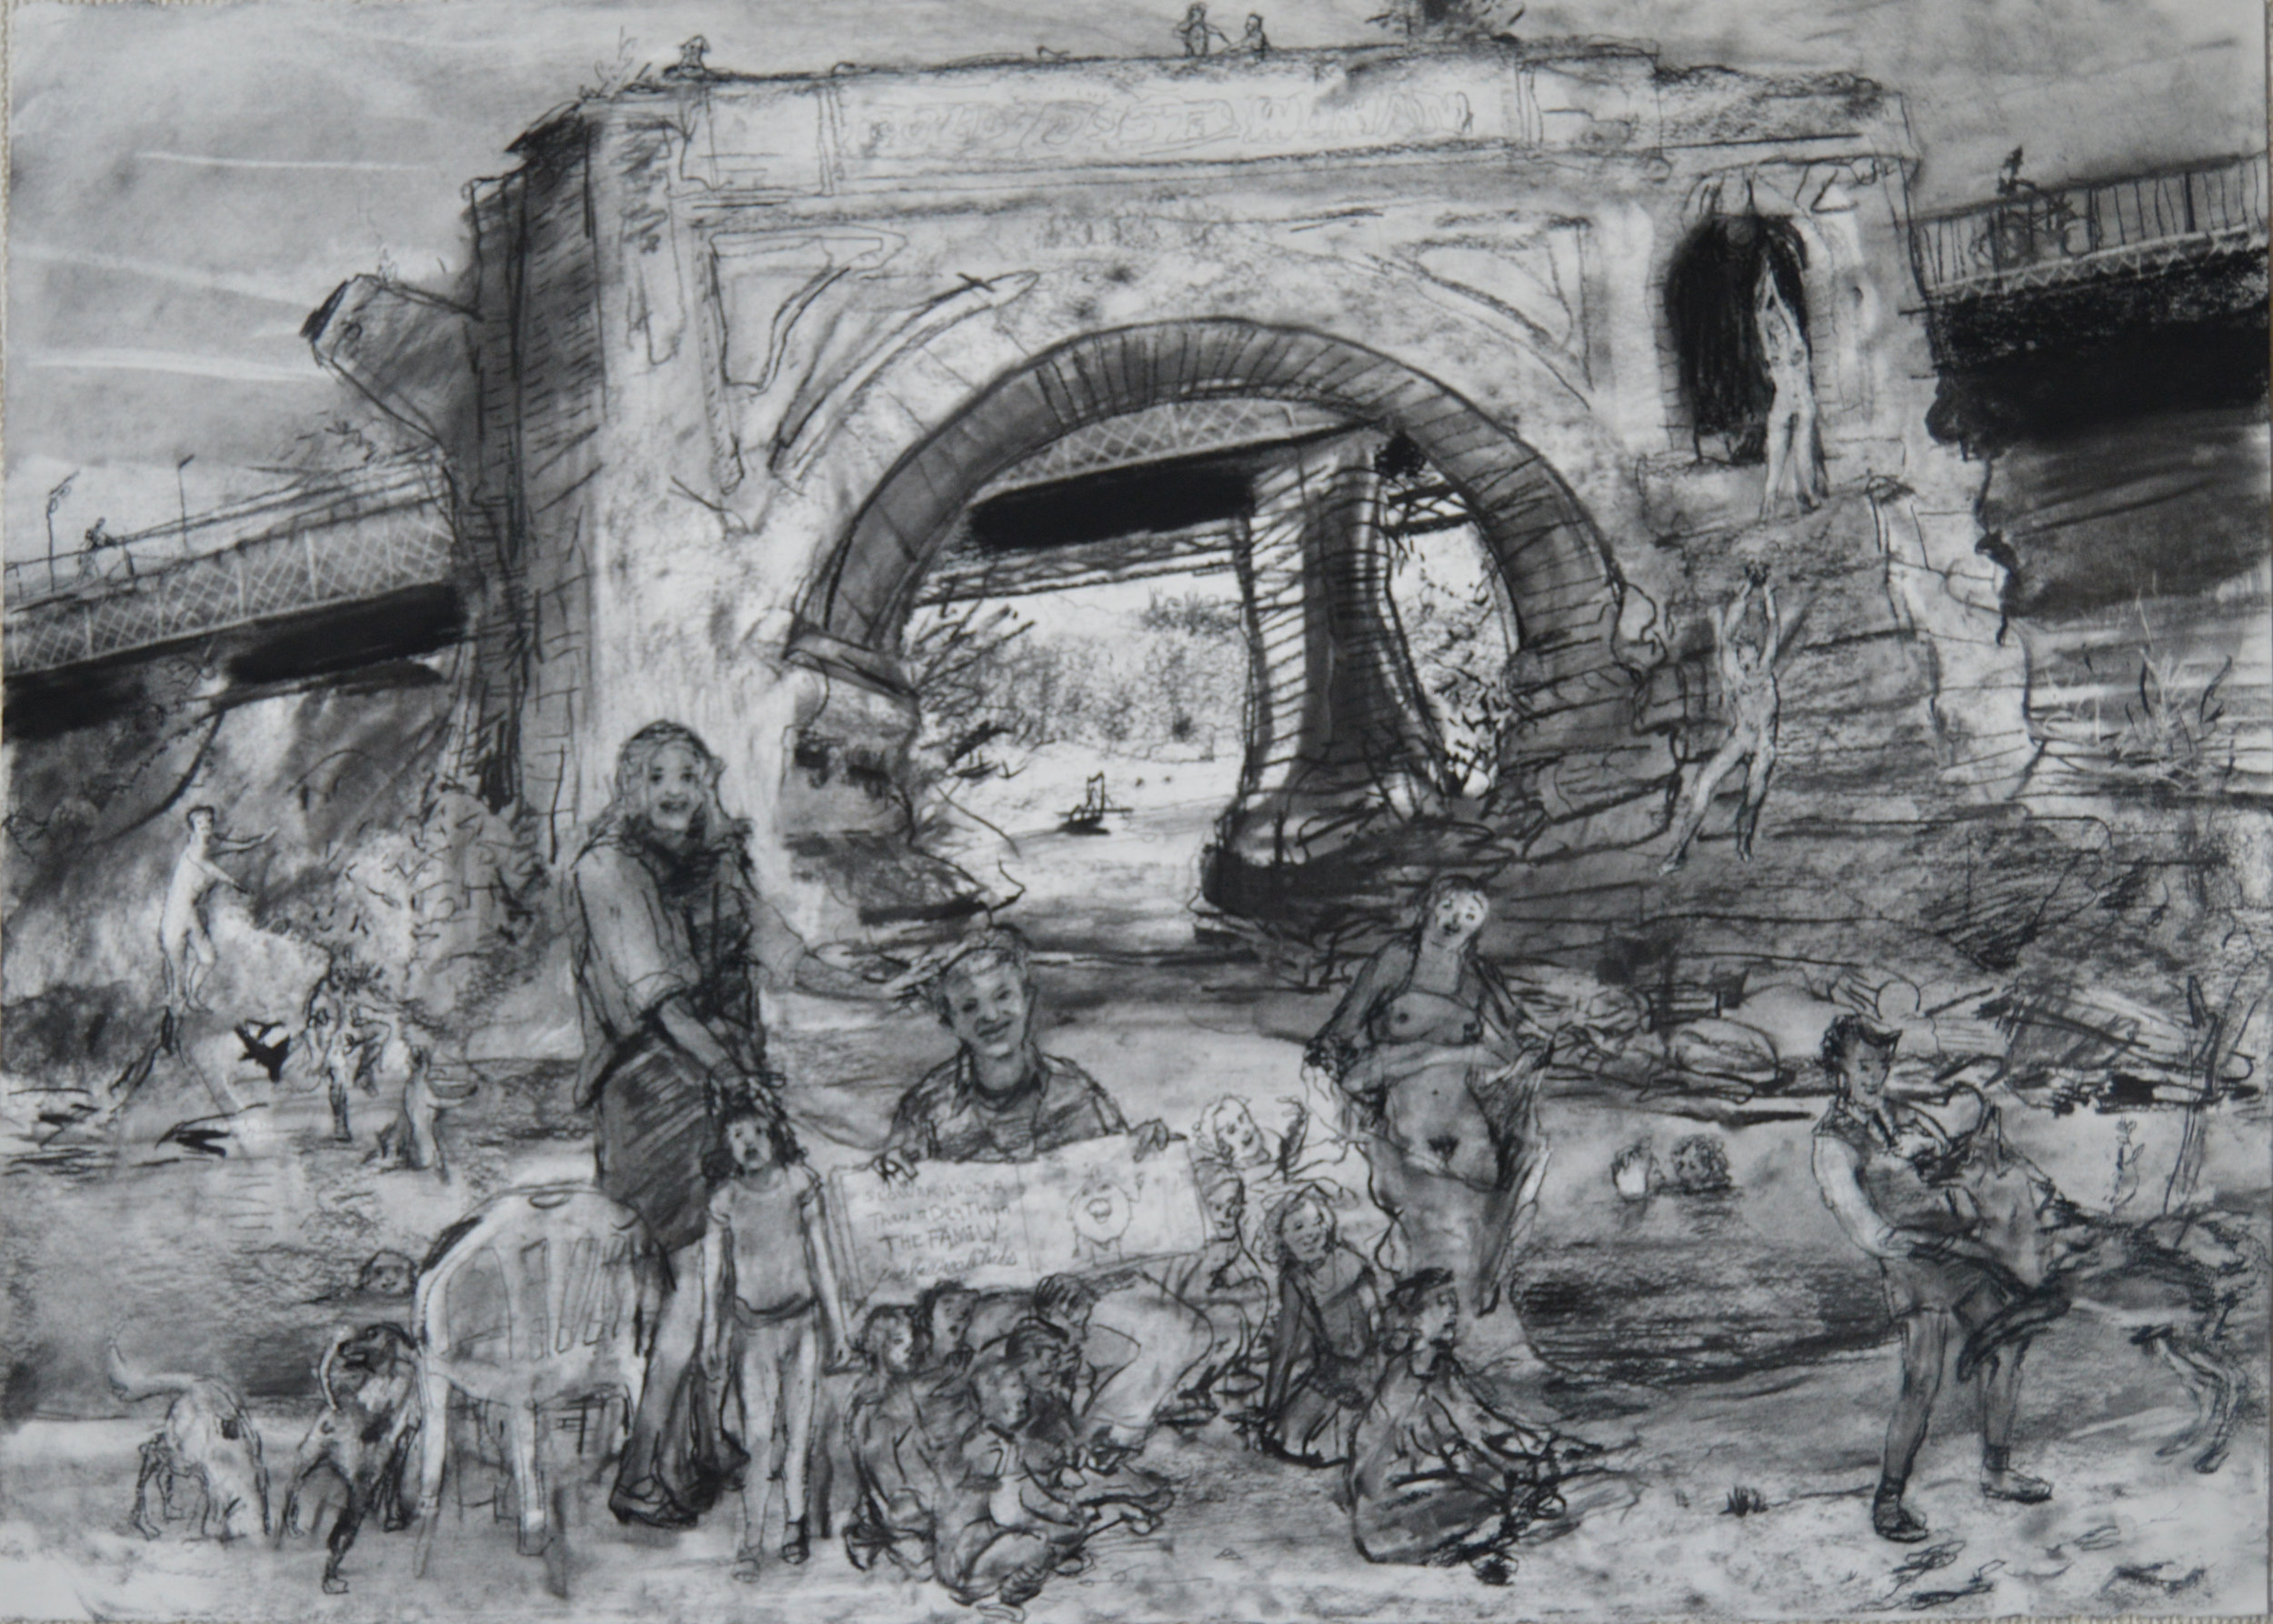 The Lost Bridge Isola Tevere Roma charcoal 28 by 40 inches 2015.jpg